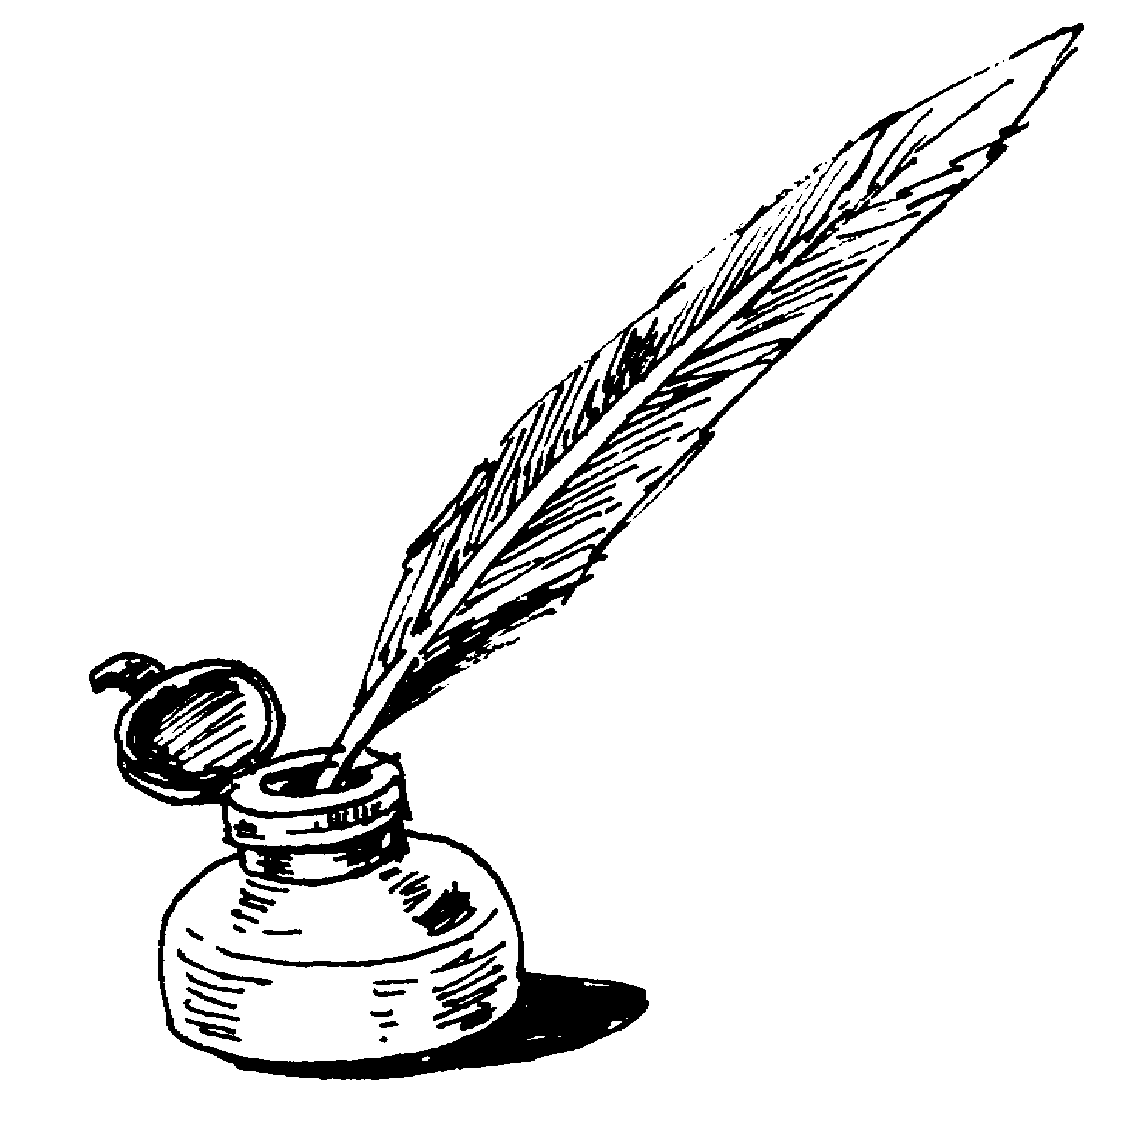 Image Quill And Ink - ClipArt Best - ClipArt Best